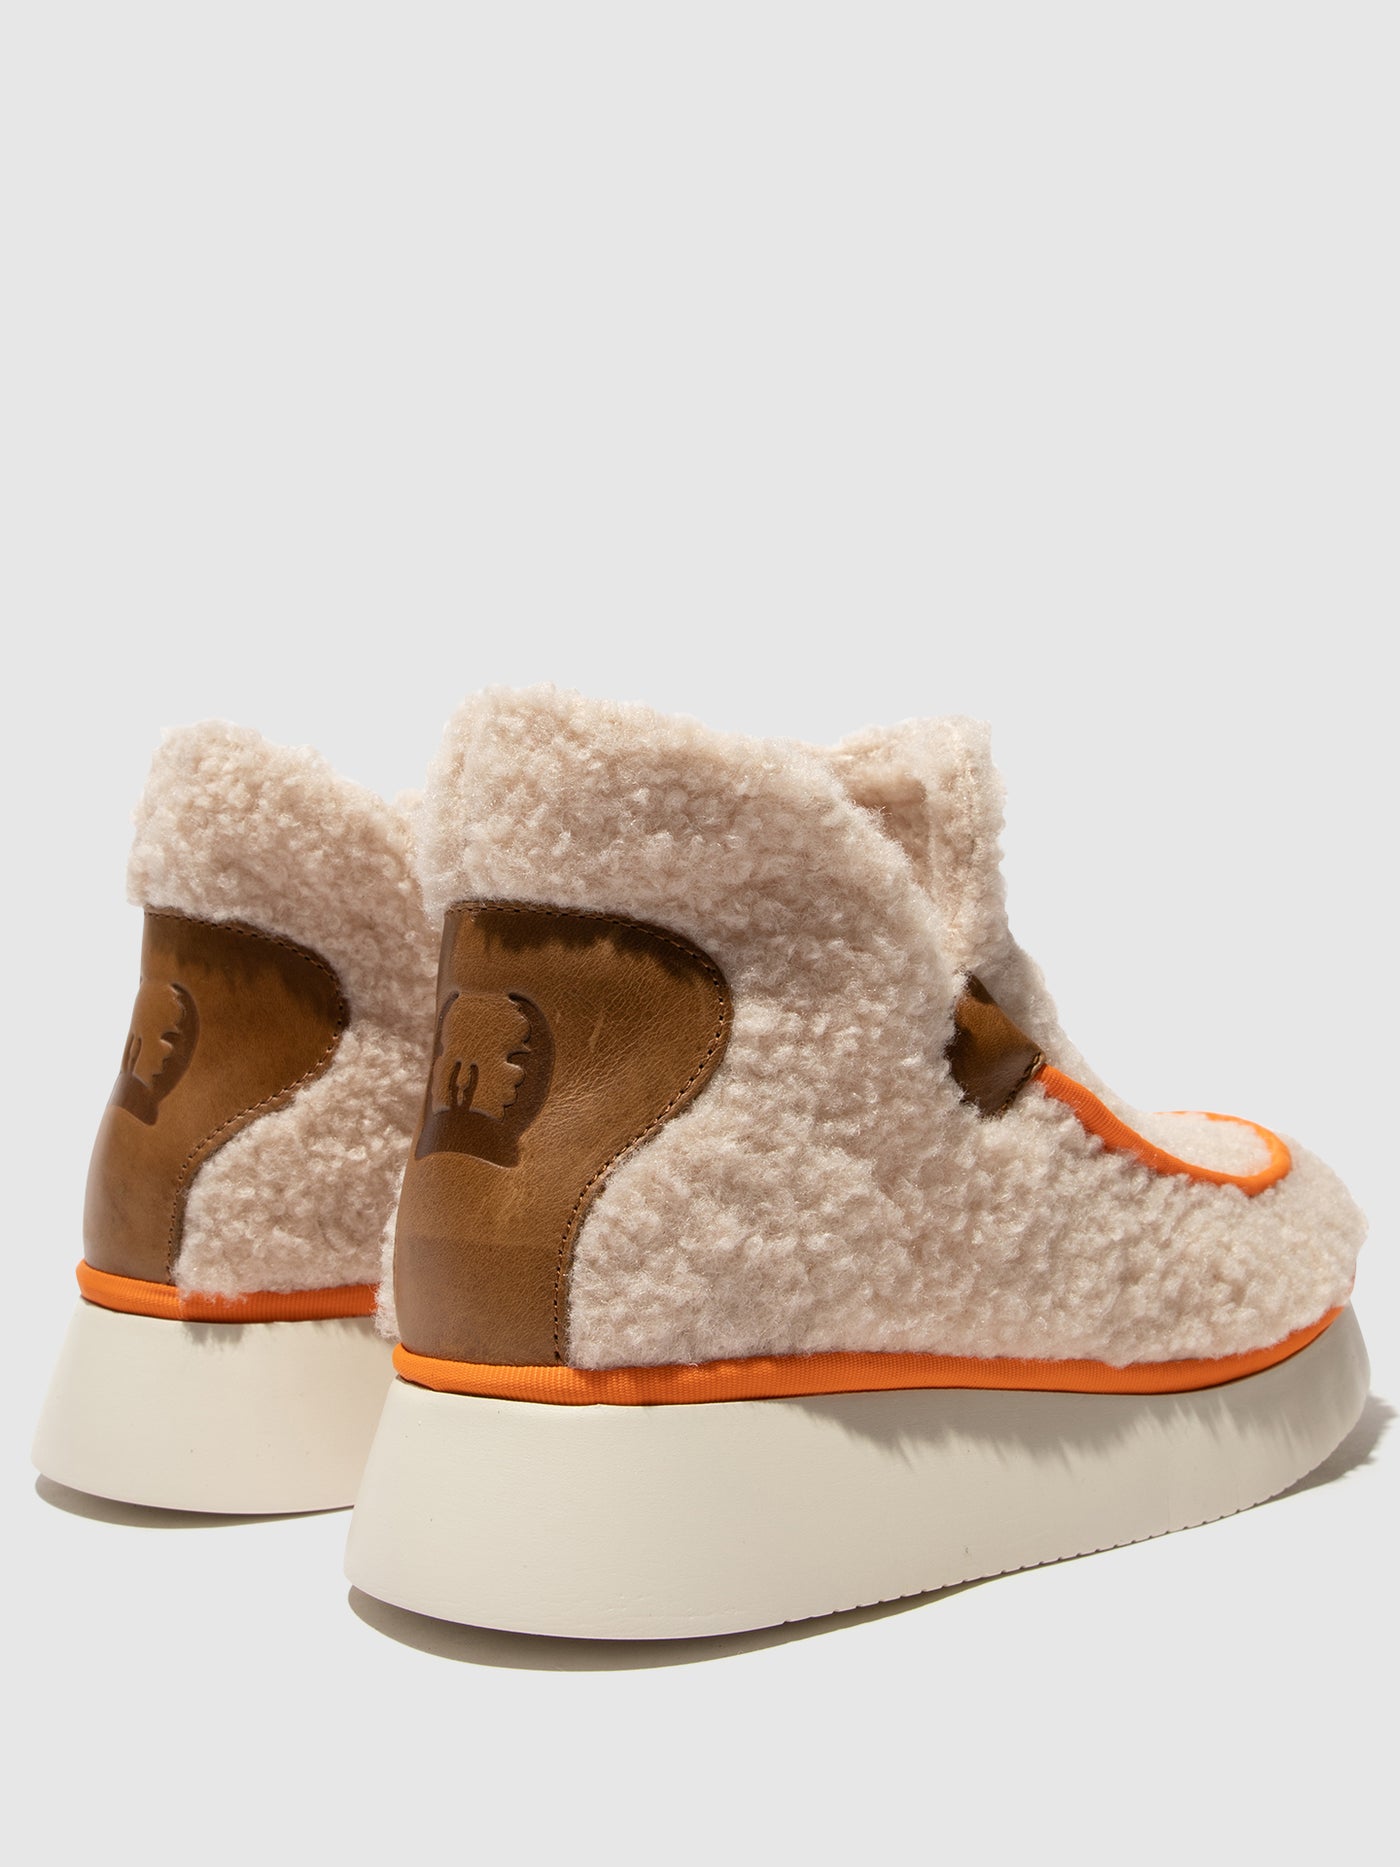 Round Toe Ankle Boots CHEP452FLY OFFWHITE/CAMEL